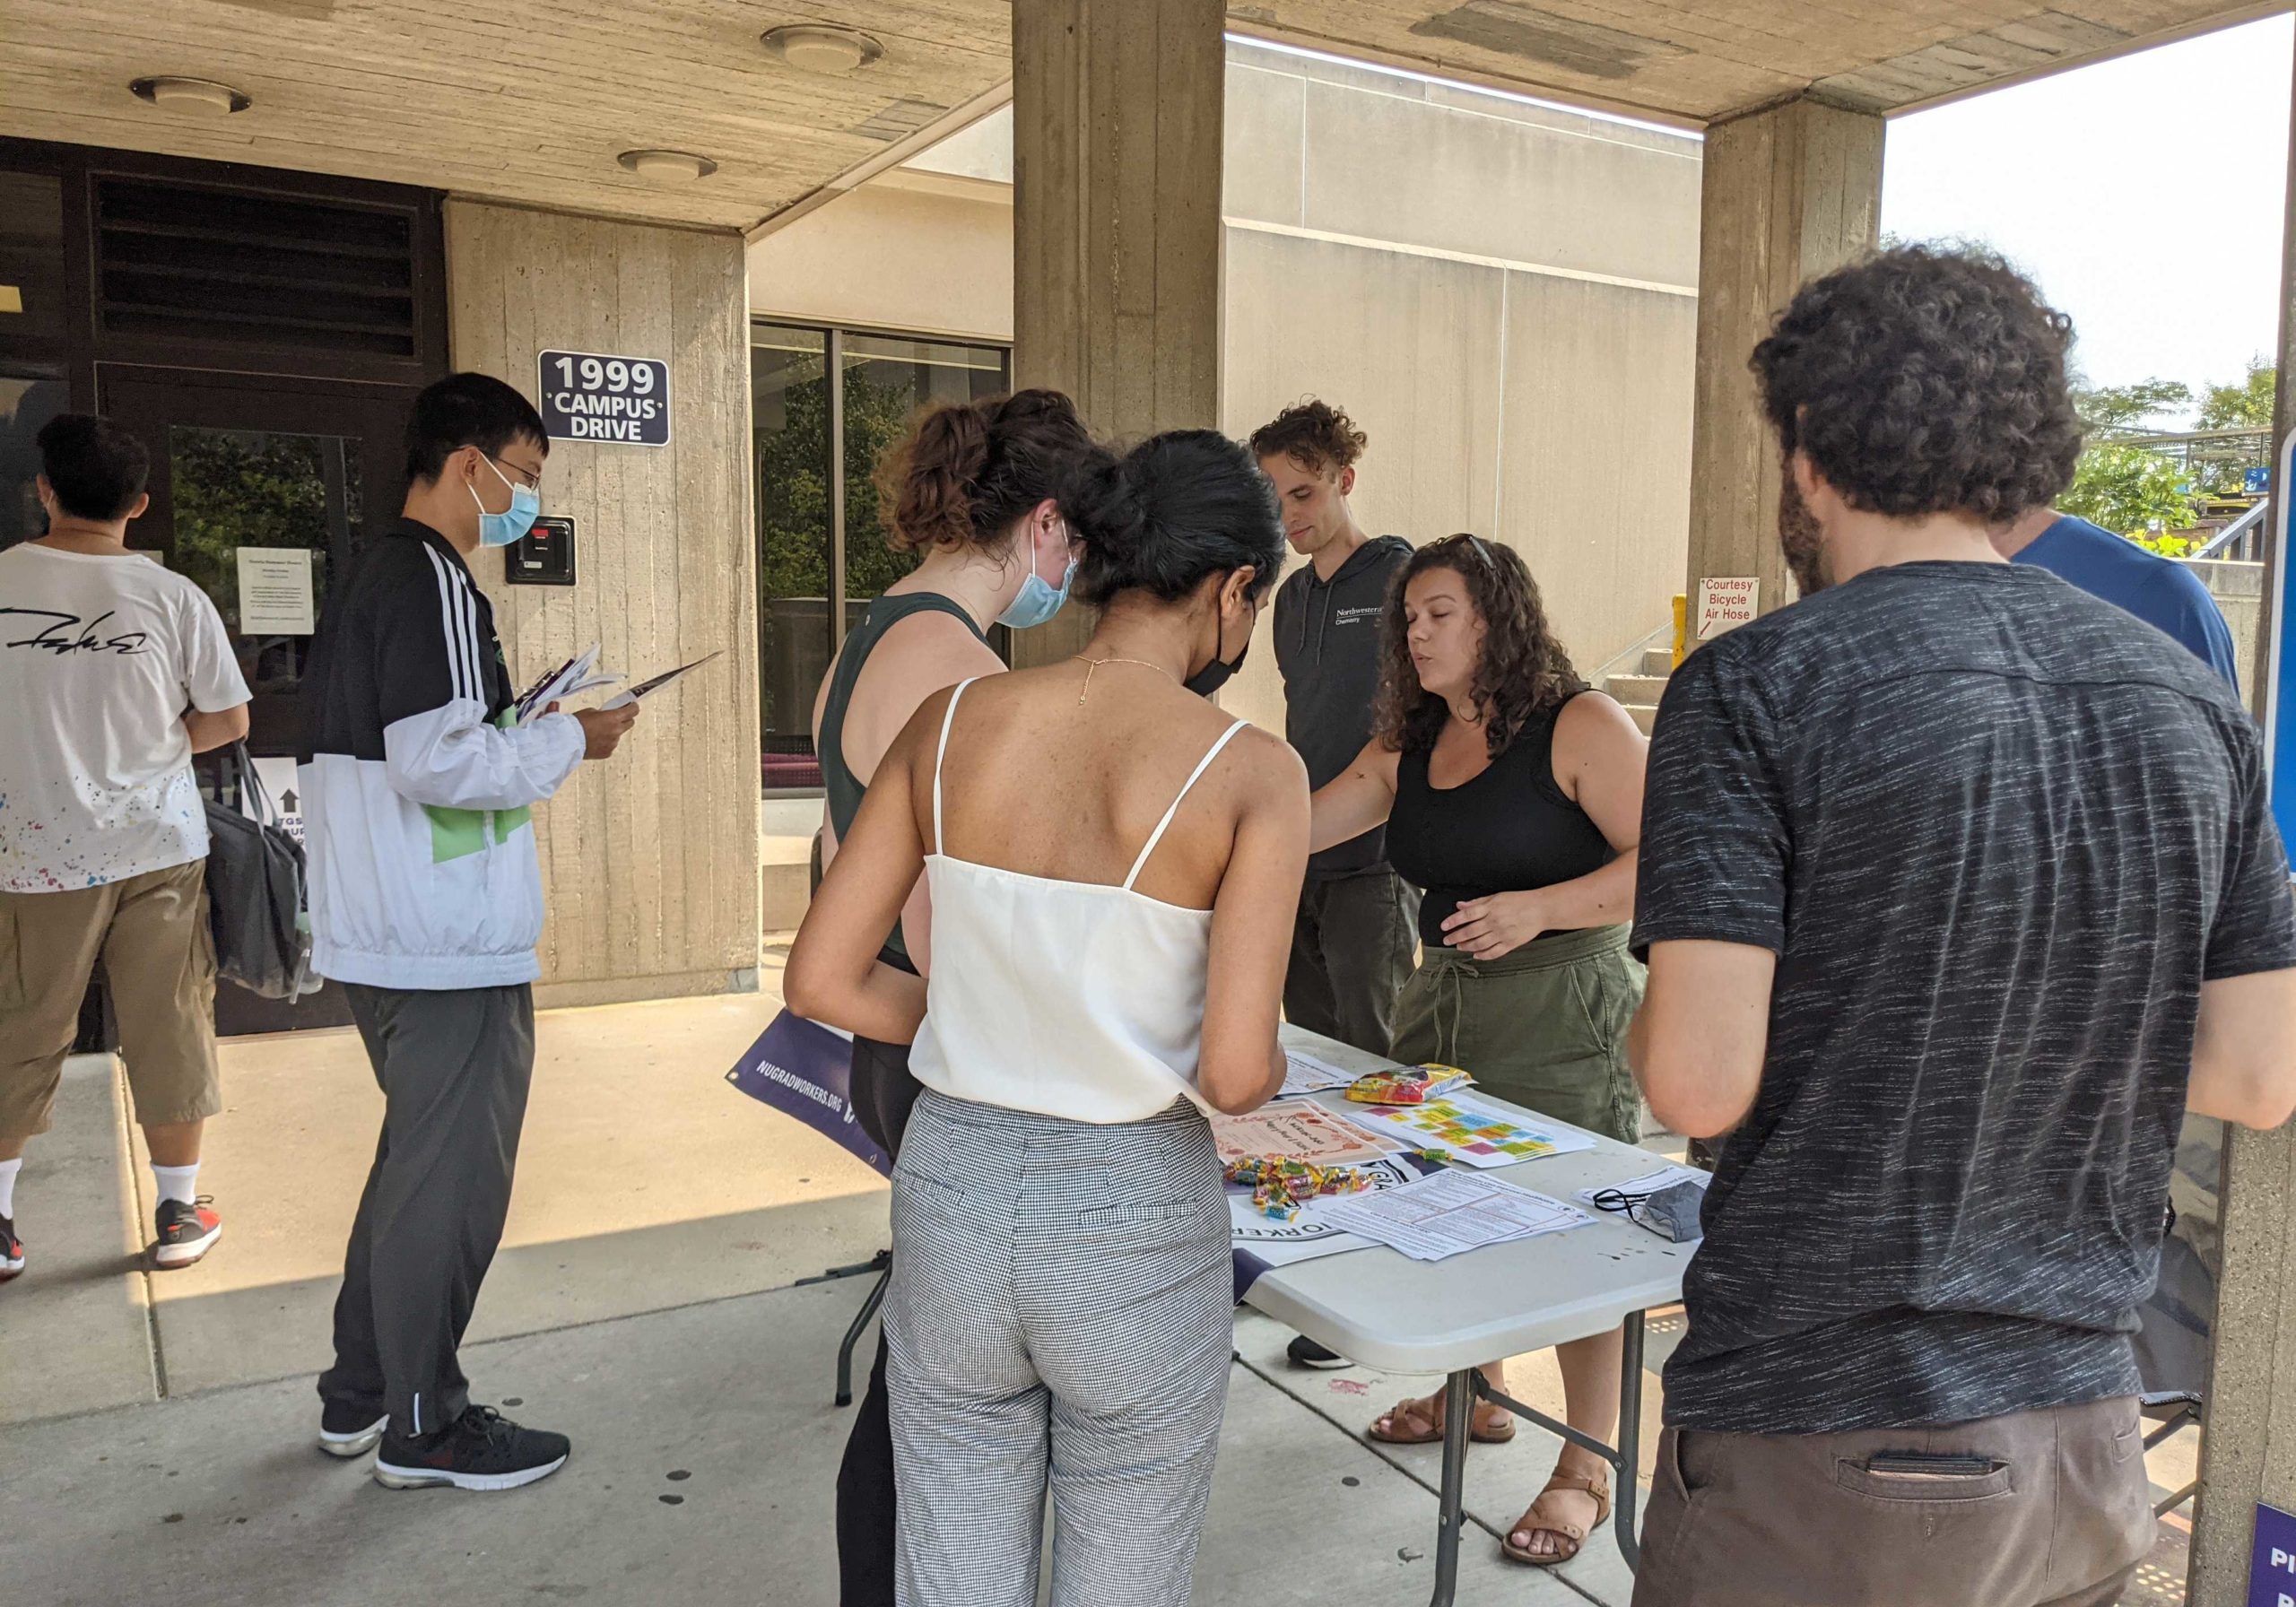 NUGW members passing out information about the union at a table on campus